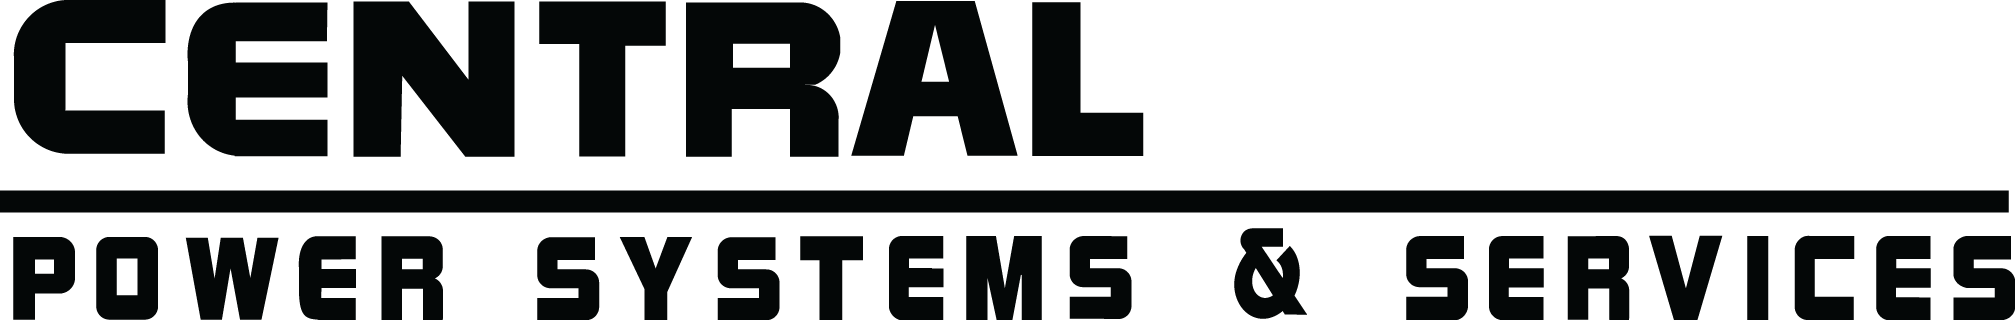 Central Power Systems & Services Logo